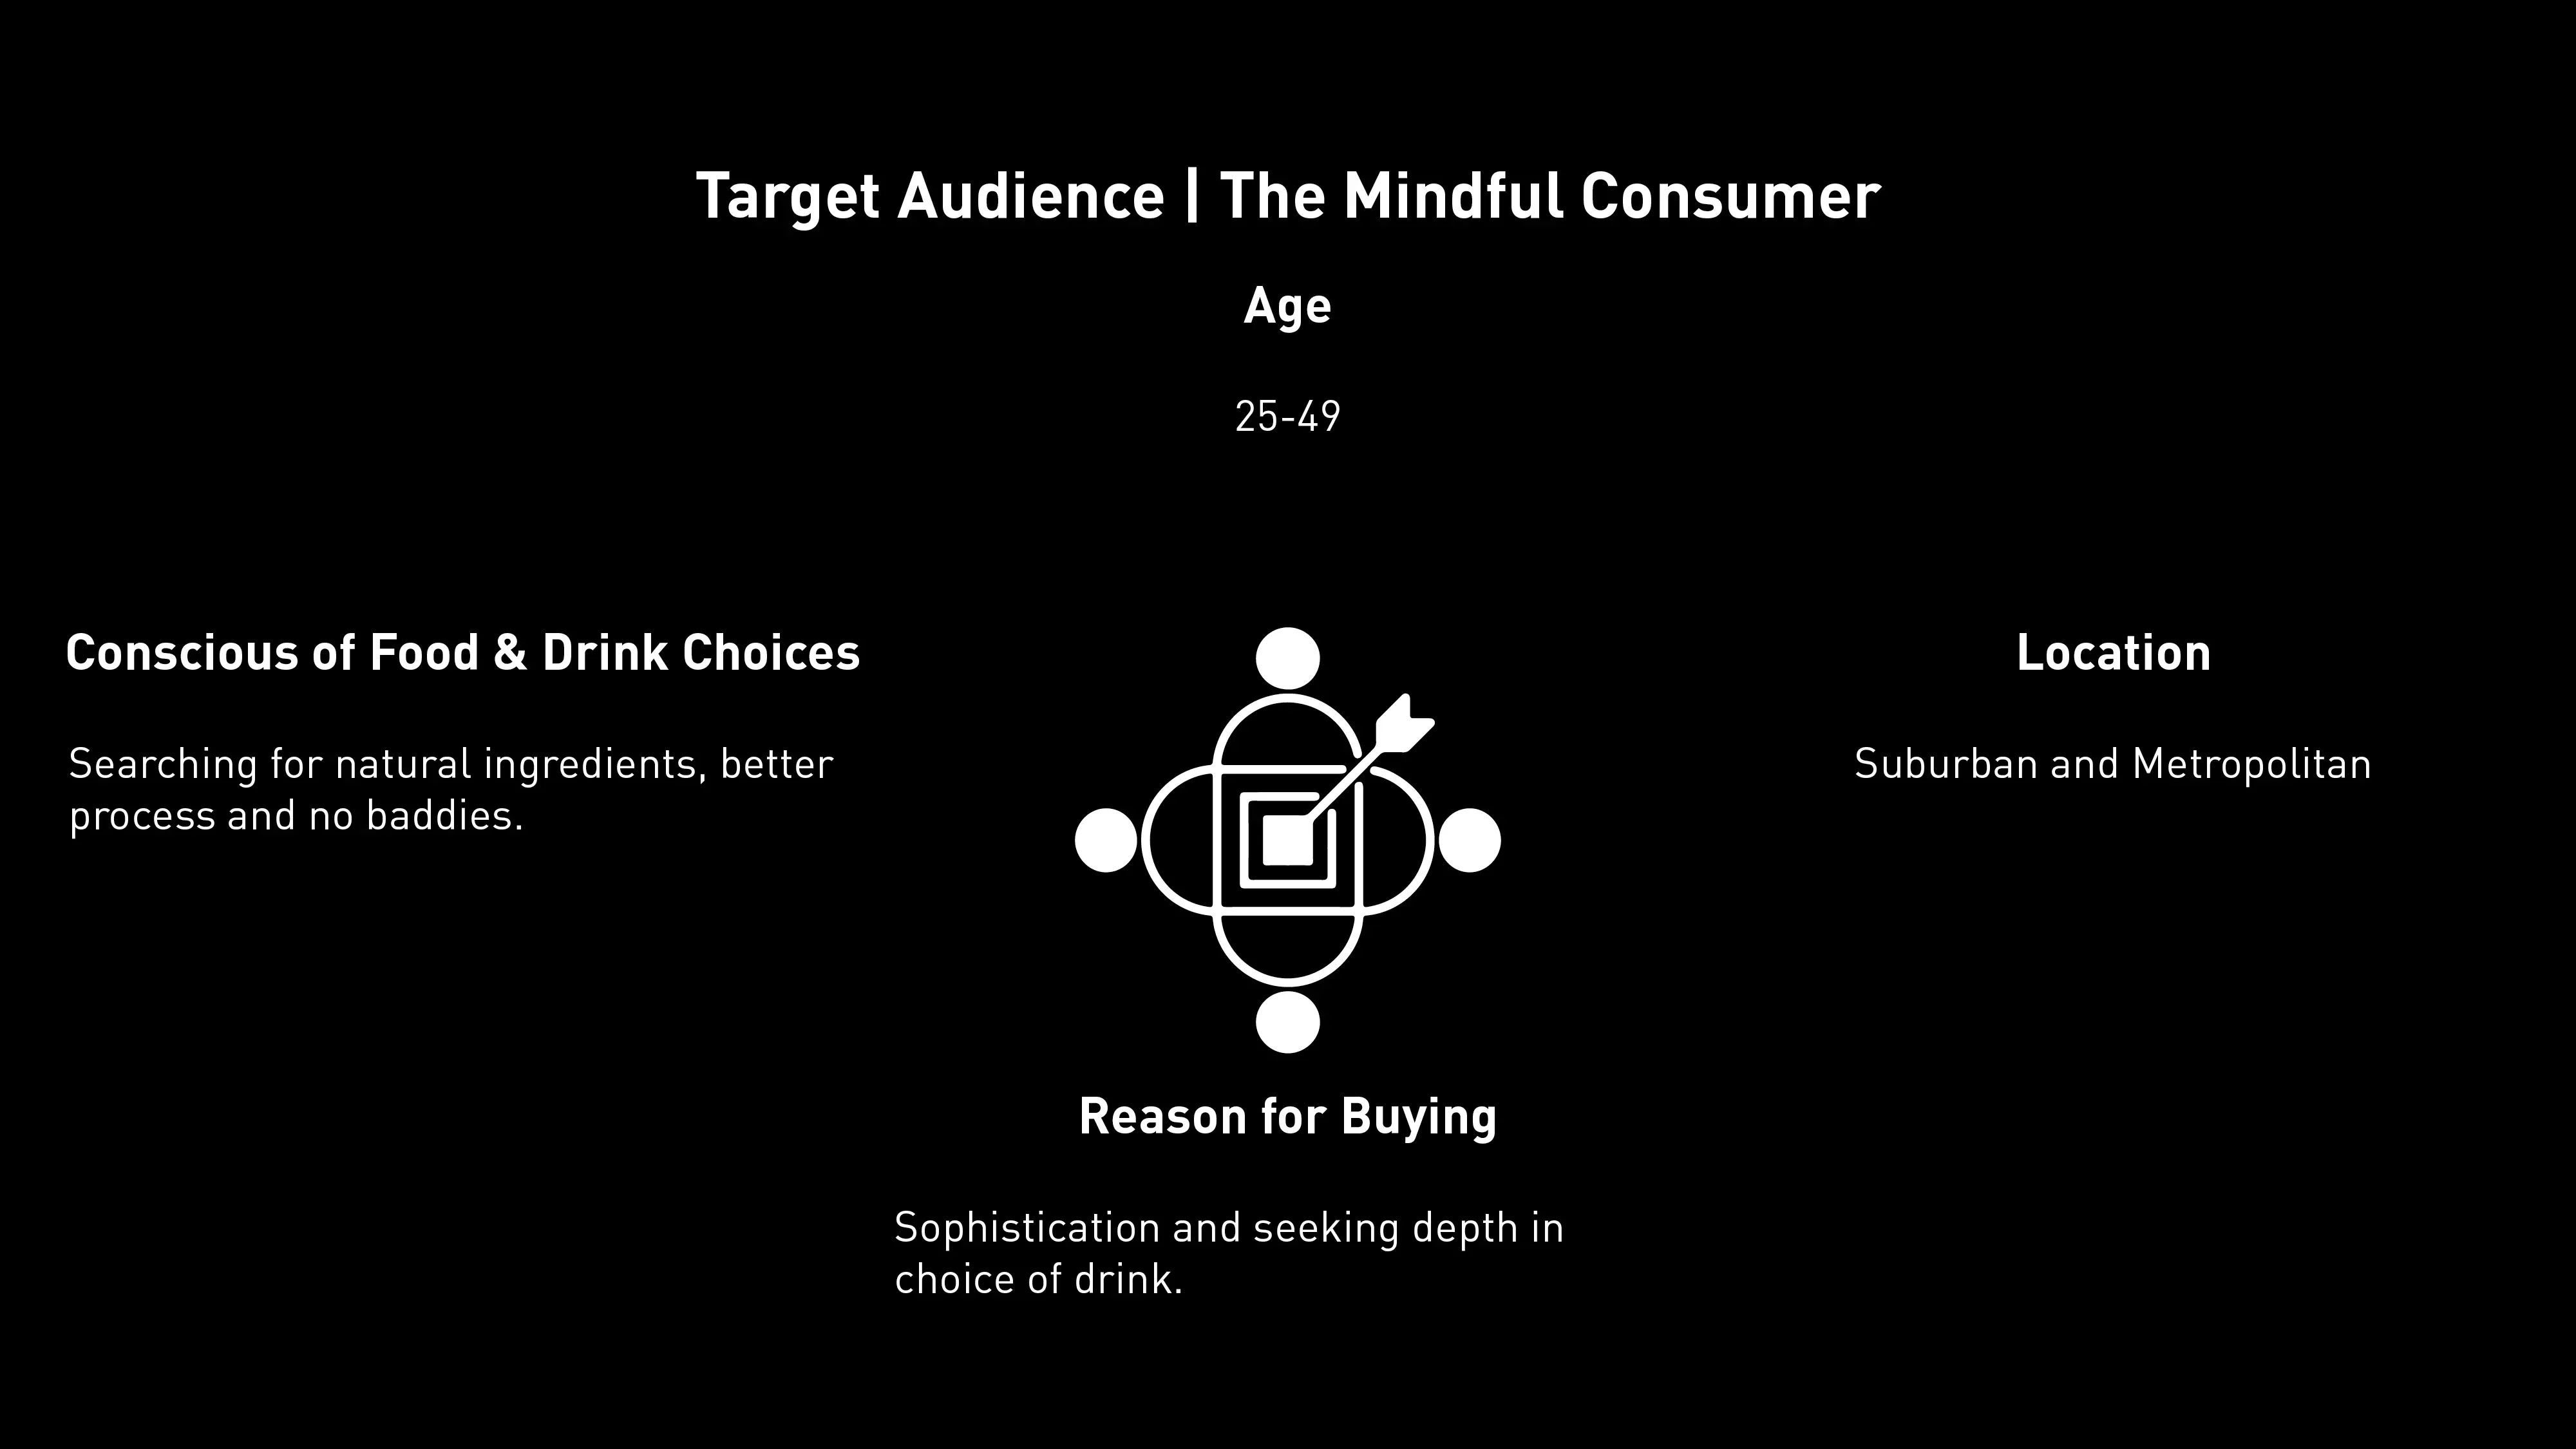 A map showing the target audience. Humans aged 24-49 that make conscious consumption choices who live in a metropolis or suburb. Their reason for buying is centered around a sophisticated decision.